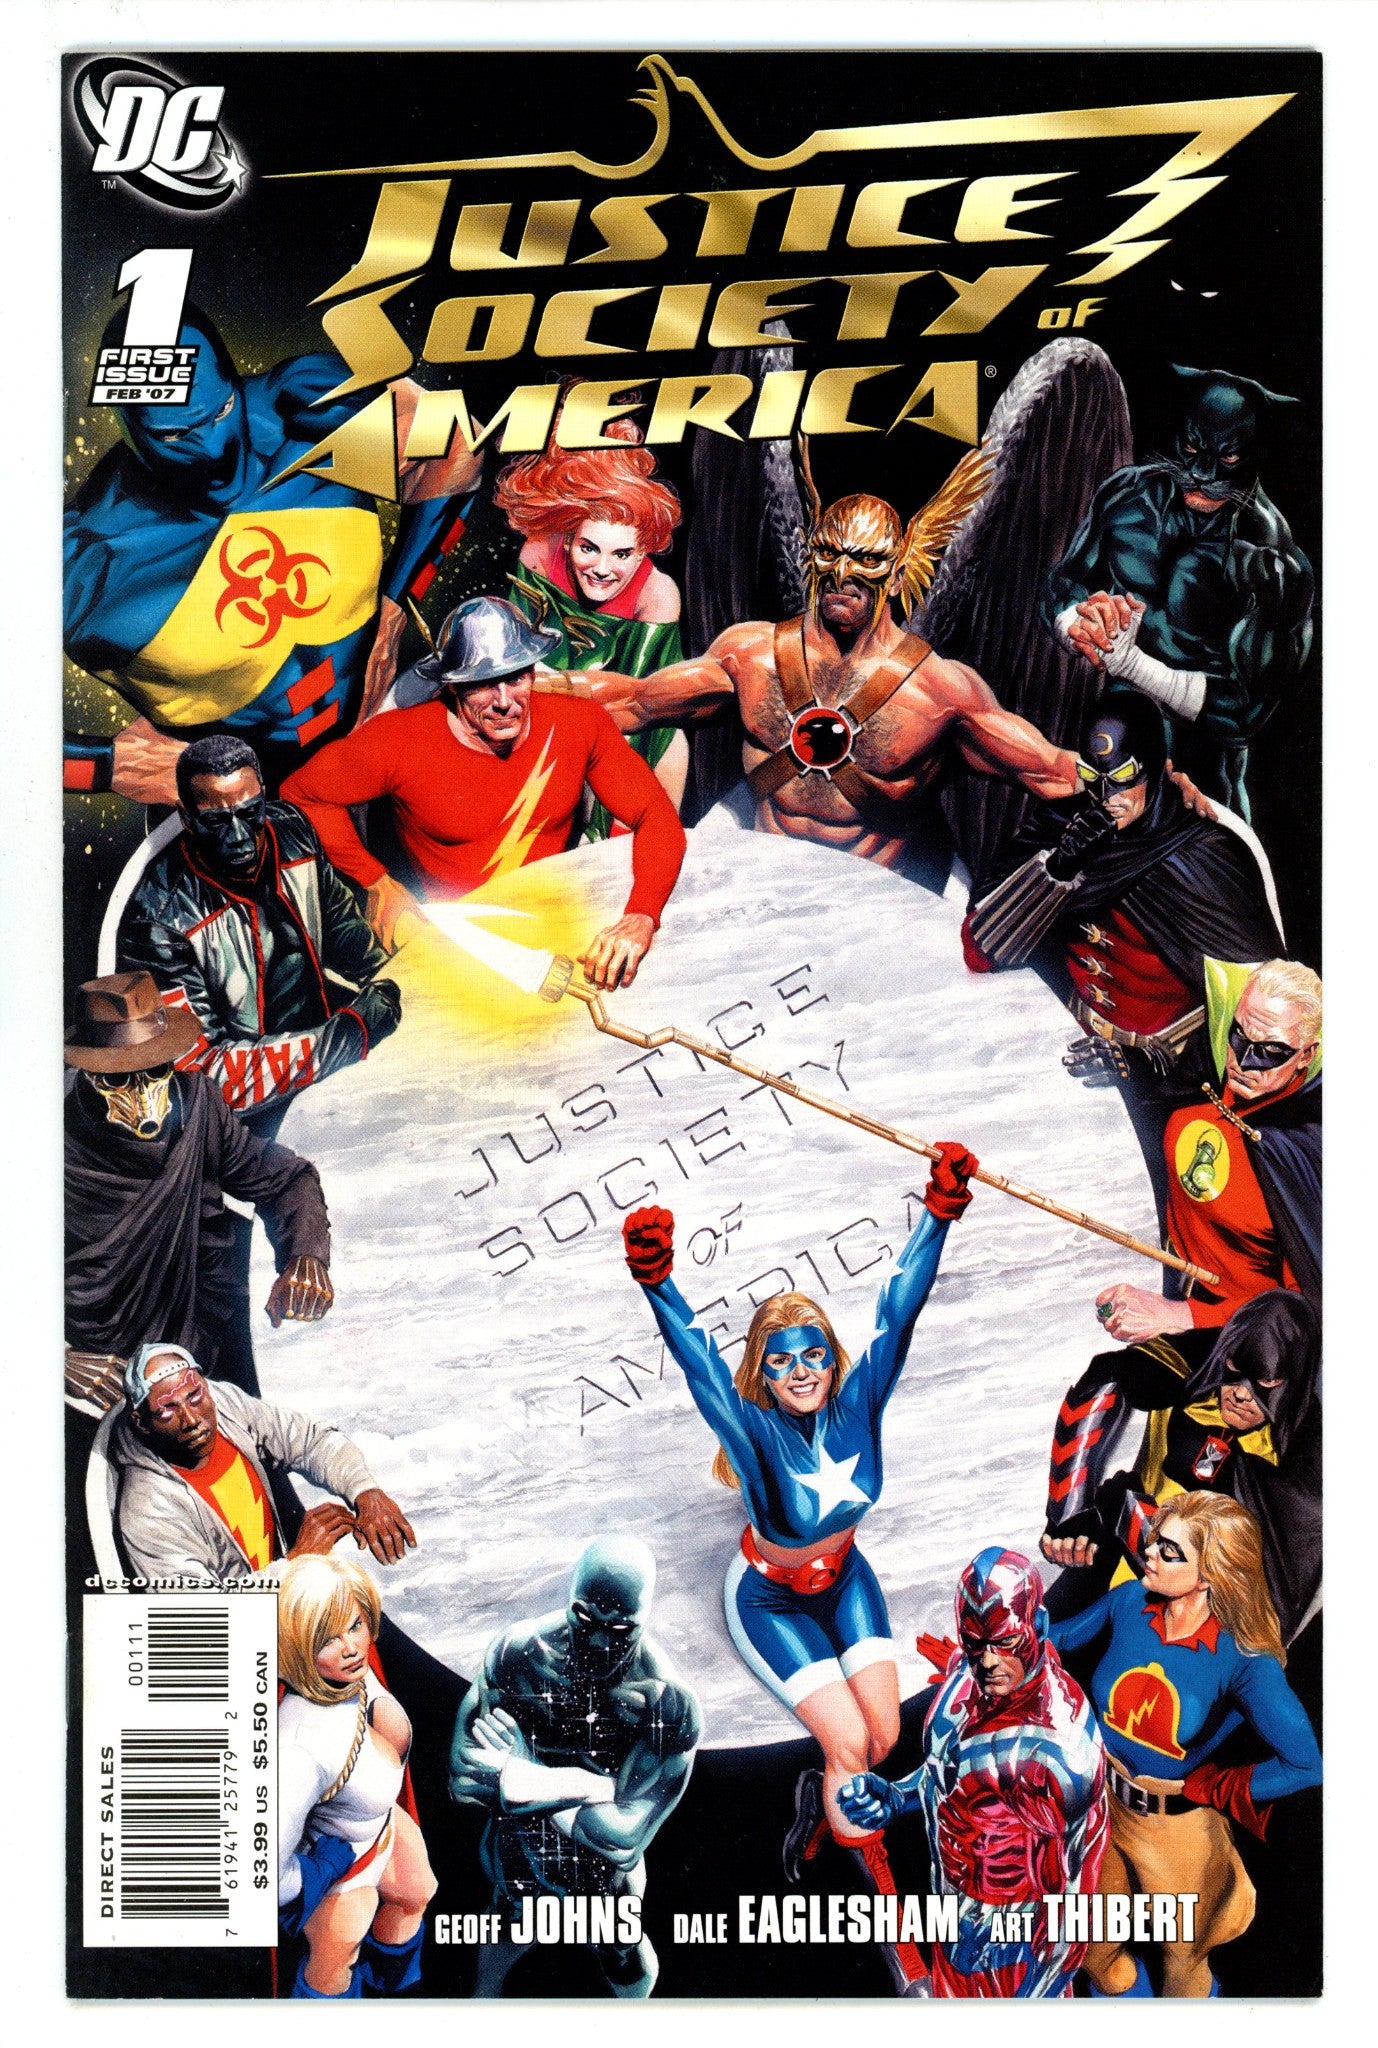 Justice Society of America Vol 3 1 NM- (9.2) (2007) 